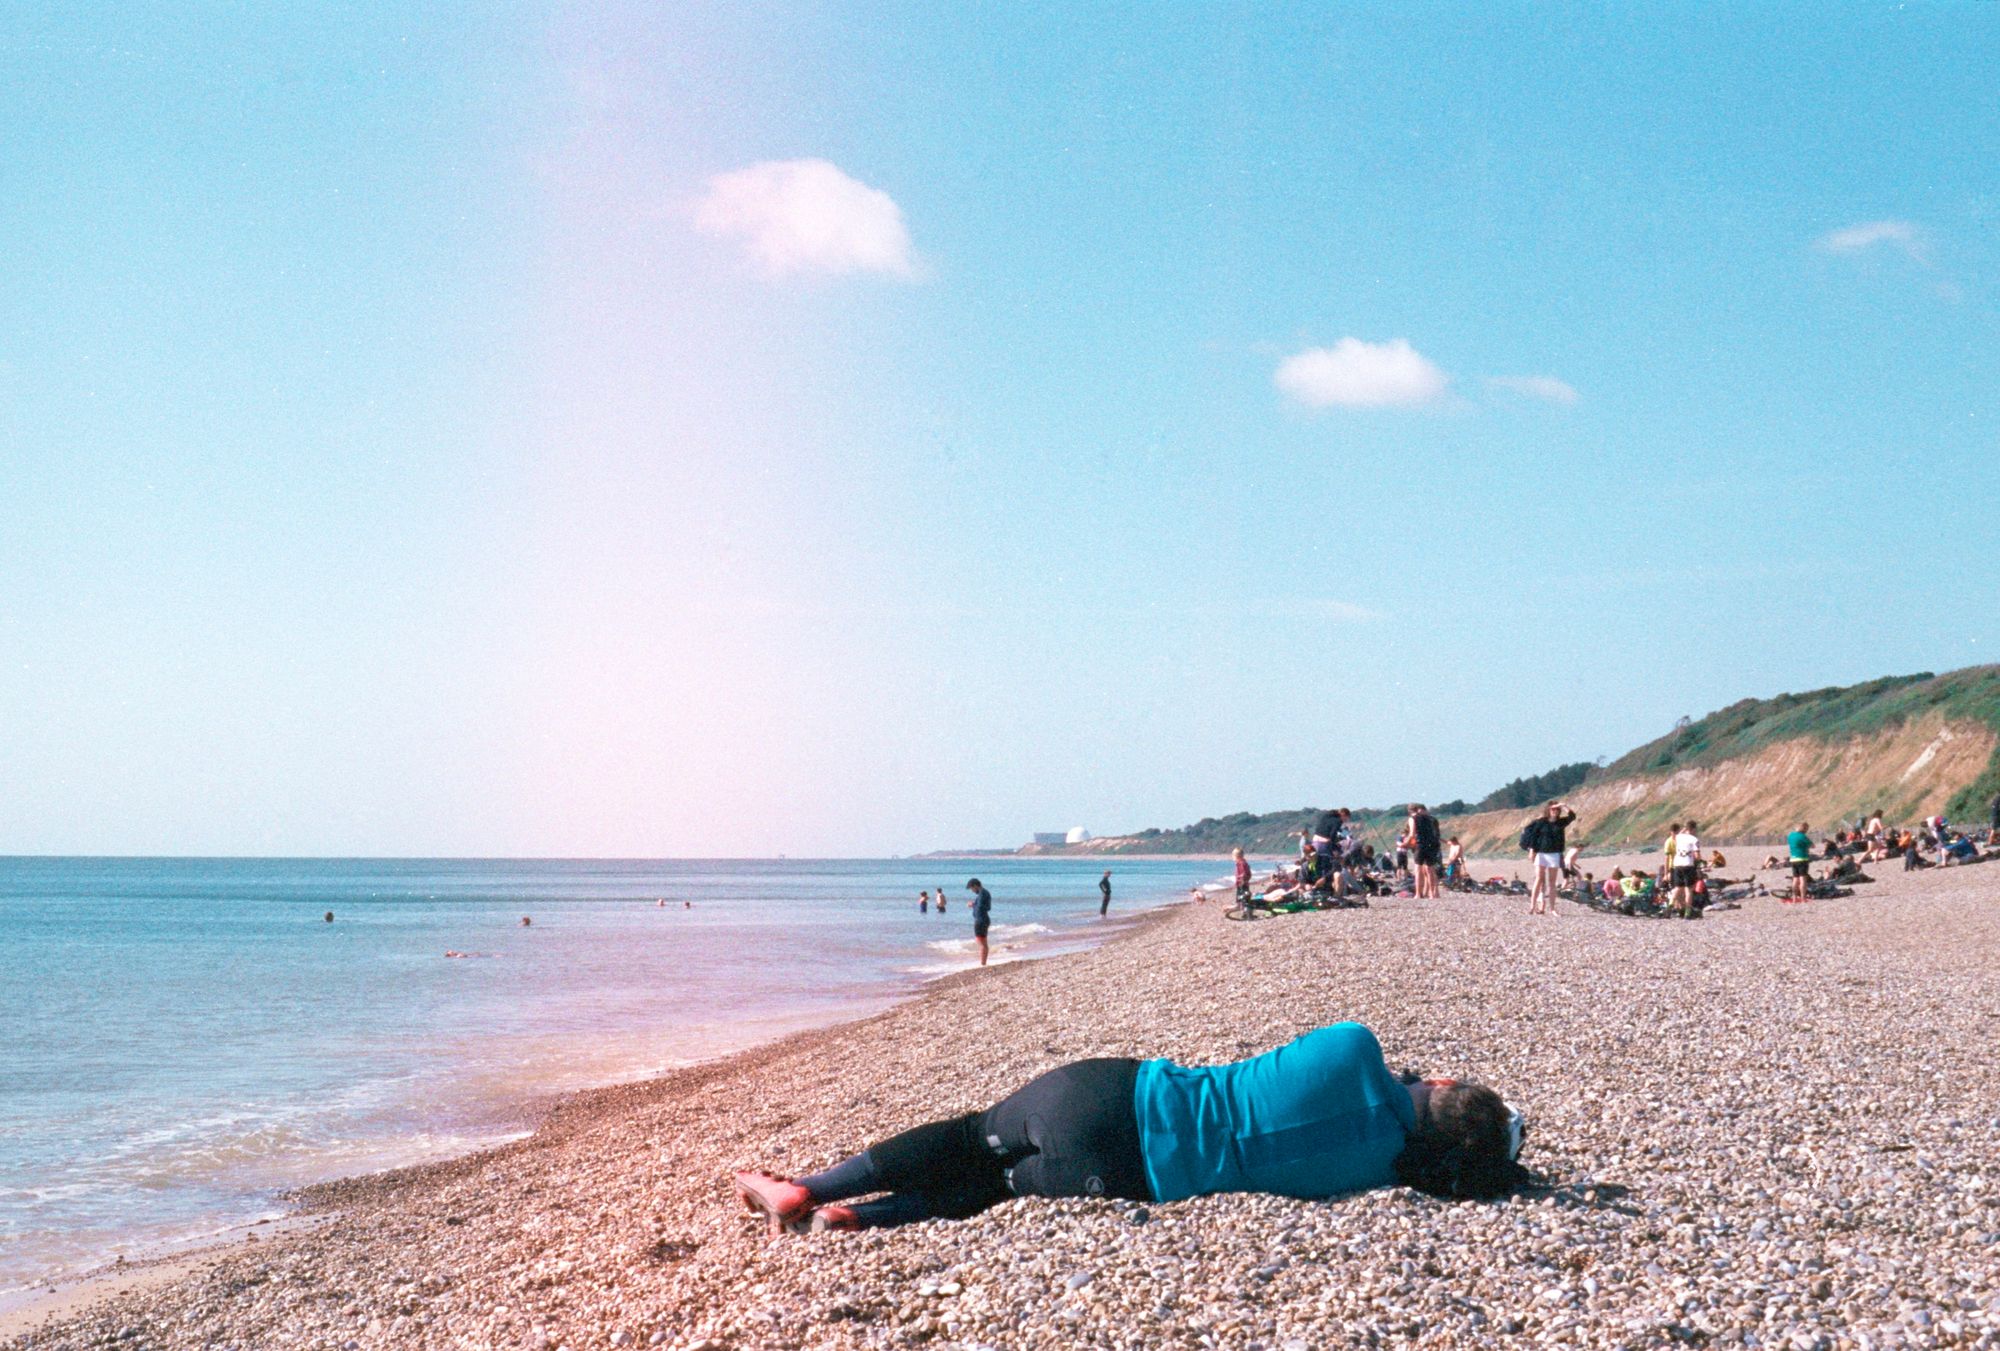 A cyclist lies on a shingle beach with people milling about near the sea and some swimming in the sea itself on a sunny day. In the distance, the white dome of Sizewell B power station sticks out on the sloped coastline like a sore thumb.